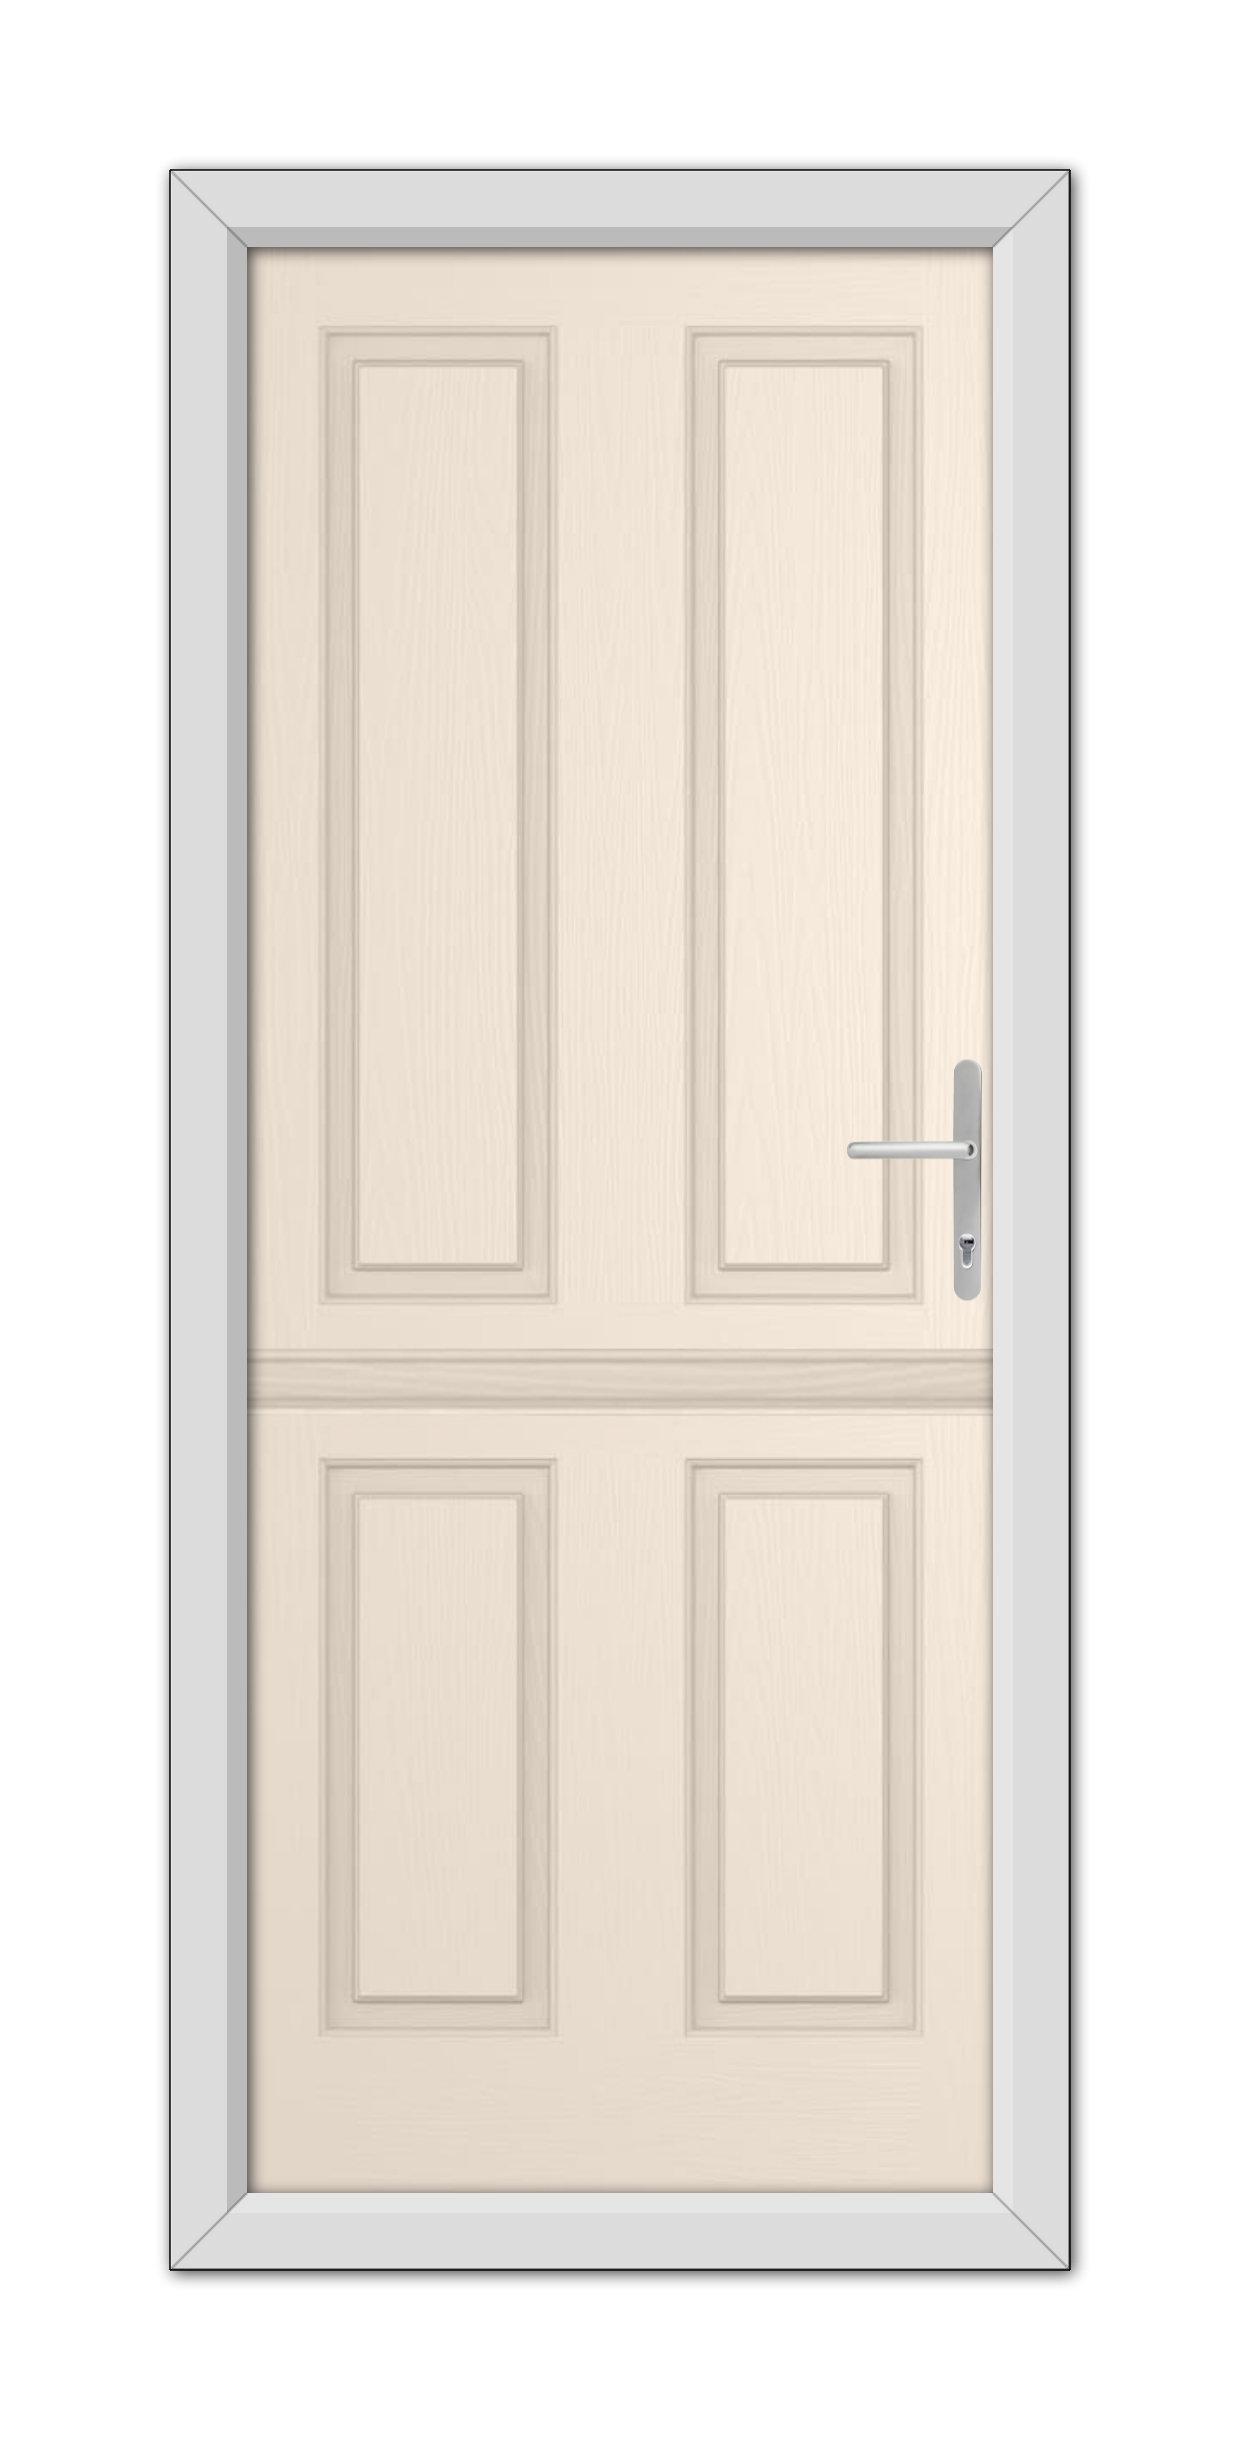 A Cream Whitmore Solid Stable Composite Door 48mm Timber Core with a silver handle on the right, set in a simple gray door frame.